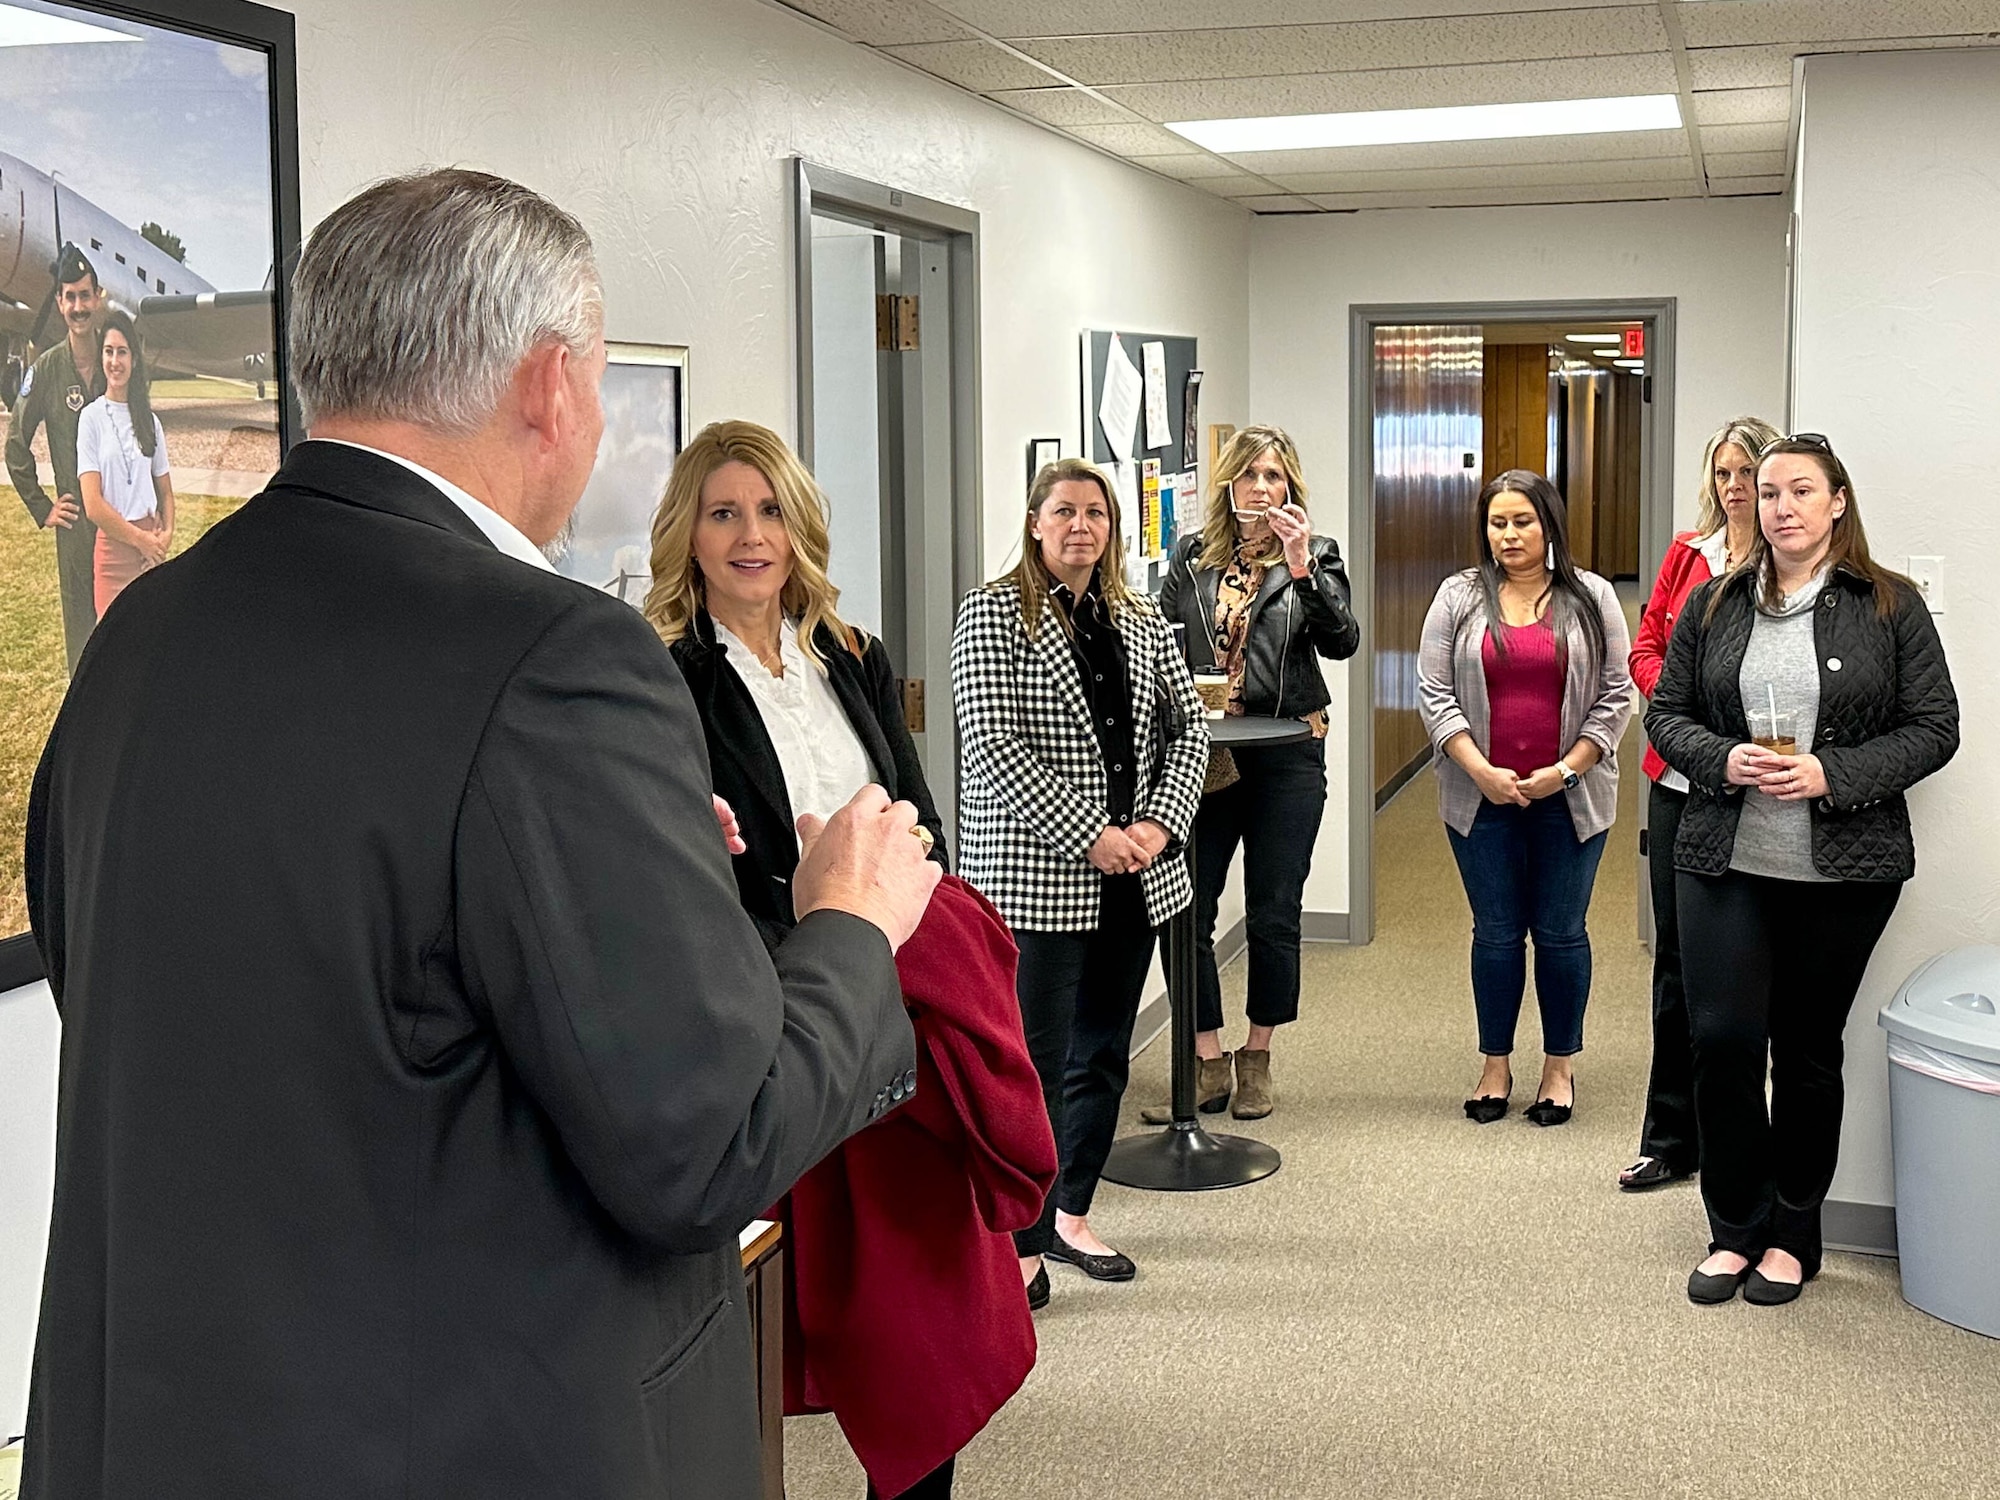 Rodger Kerr, Altus Chamber of Commerce president and CEO, talks with Cindy Lankford, wife of U.S. Sen. James Lankford of Oklahoma, and 97th Air Mobility Wing key spouses about the spouse coworking space at Altus, Oklahoma, Feb. 23, 2023. The space is a dedicated place for military spouses to mingle with the local community, network with local employers, and focus on their careers. (courtesy photo)